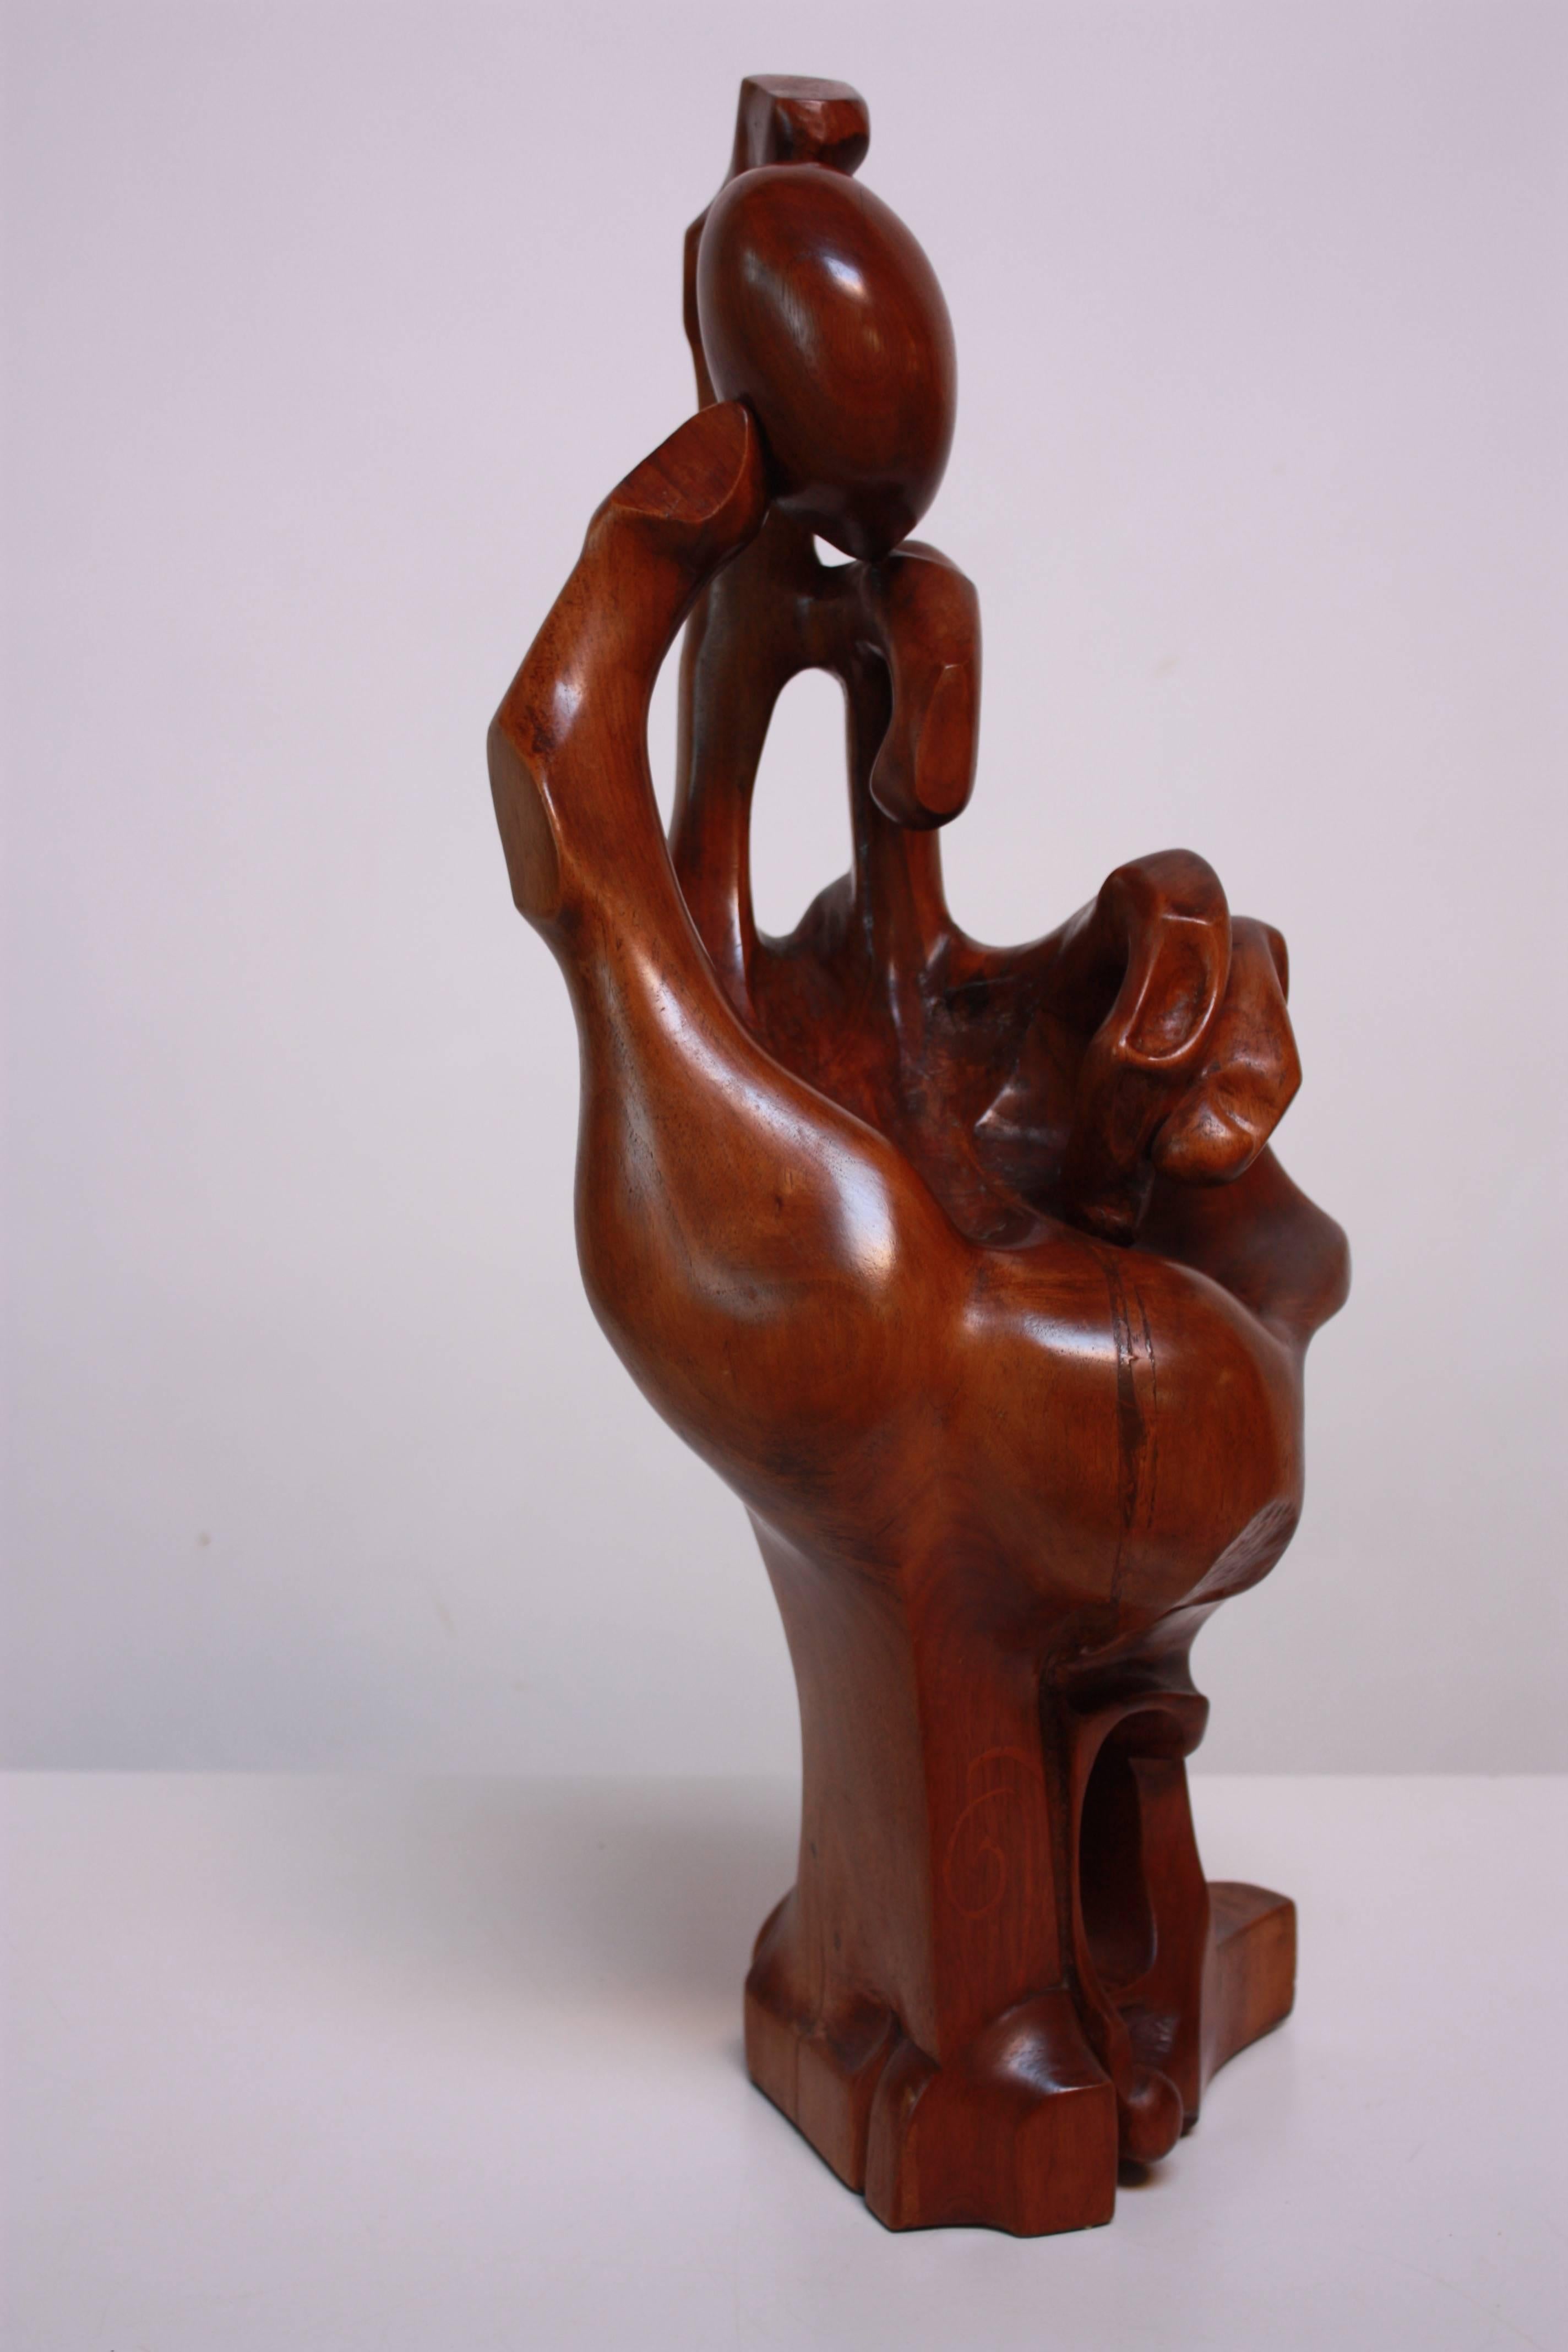 This large, hand-carved wooden sculpture depicts a hand holding a stone and boasts spectacular detail and varying textures and shapes. The work is artist signed by inlay and dated 